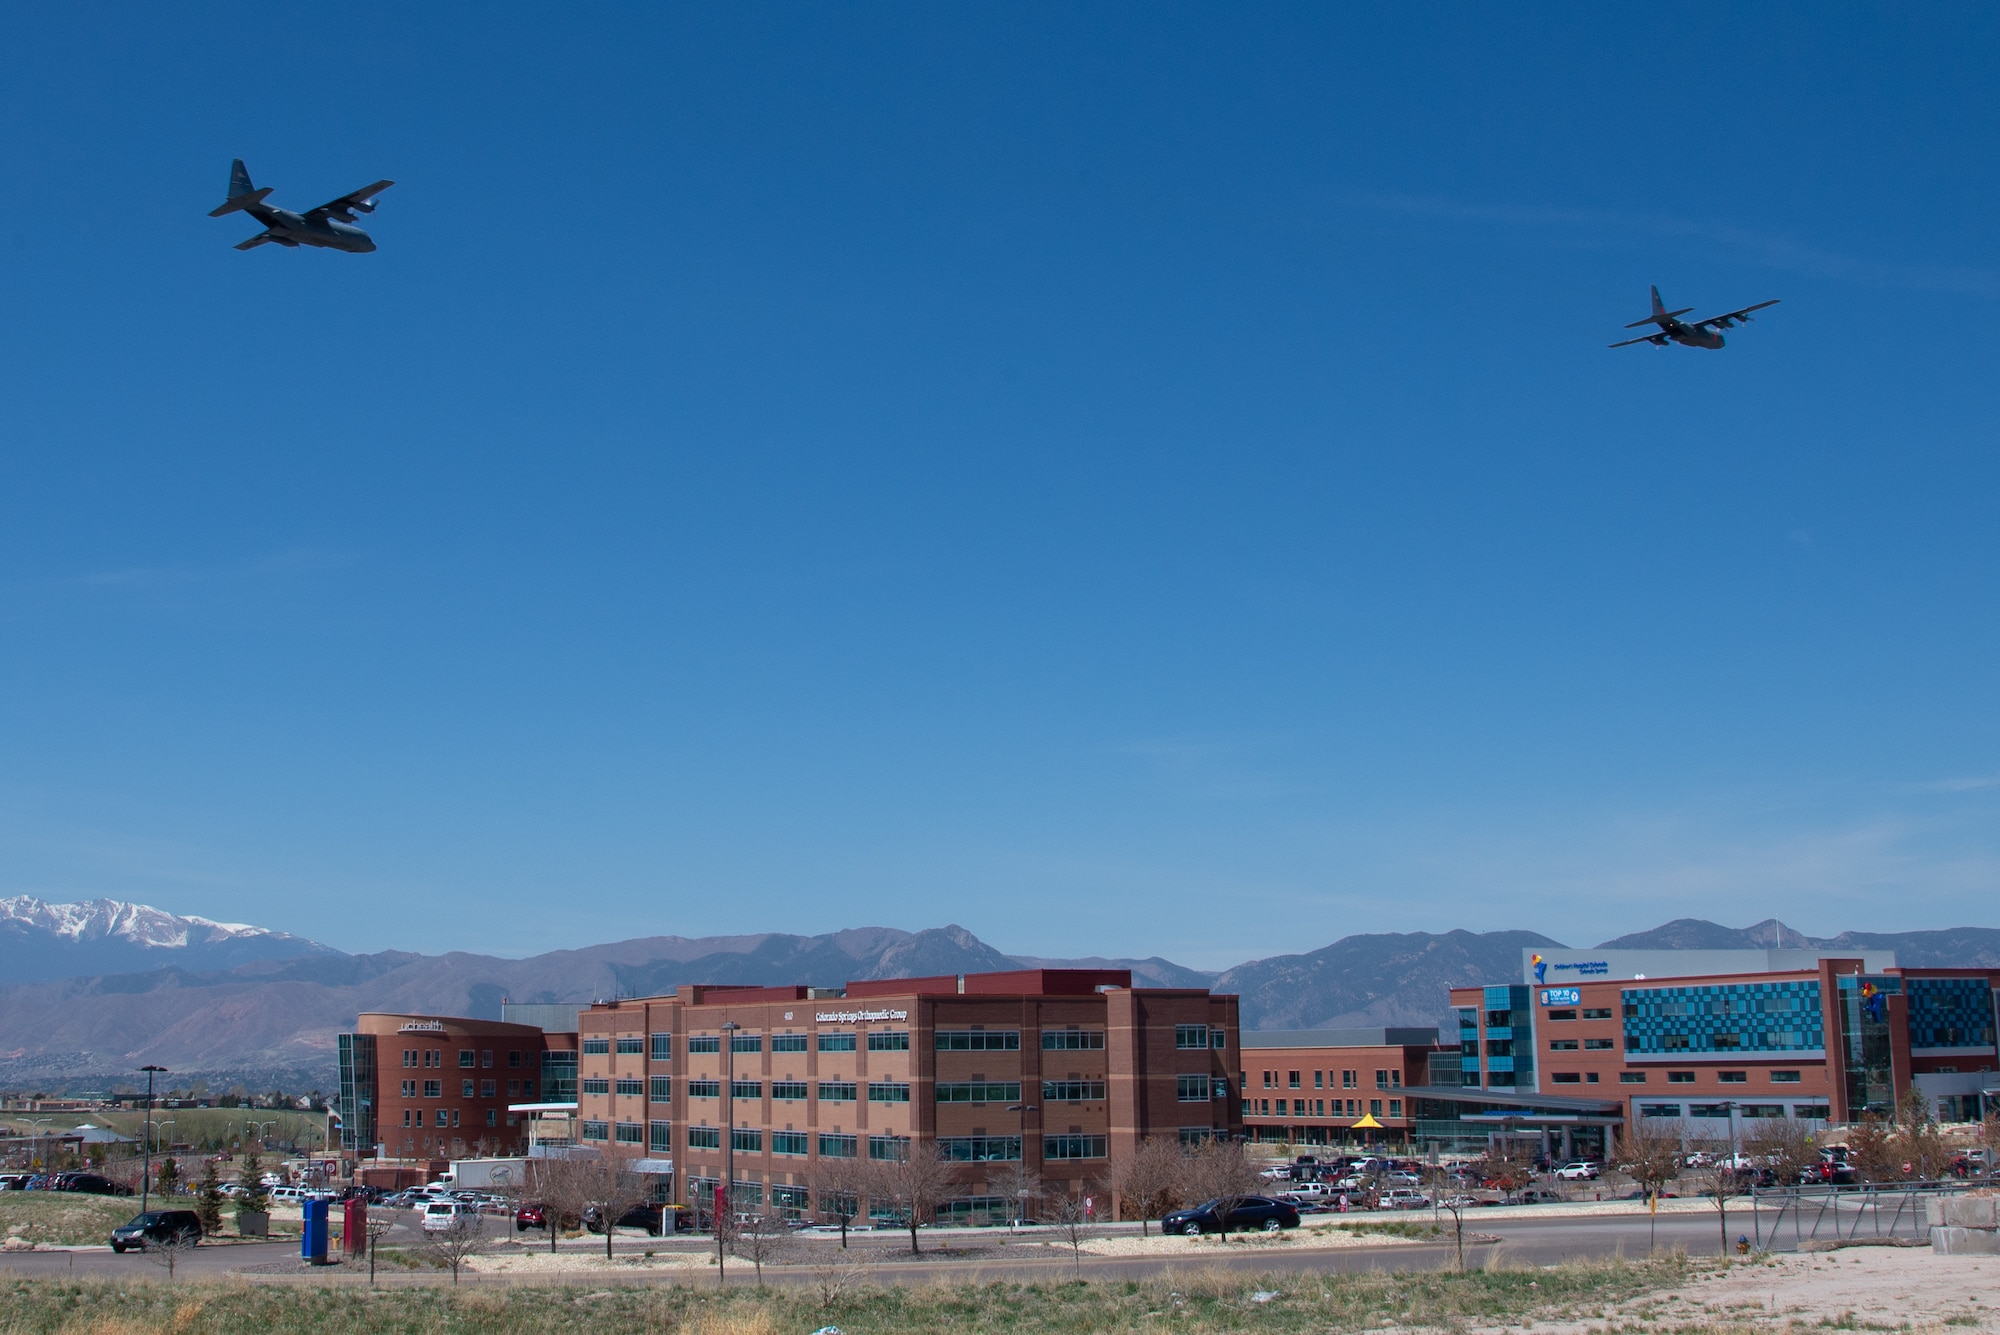 Image shows two large aircraft over Colorado hospital